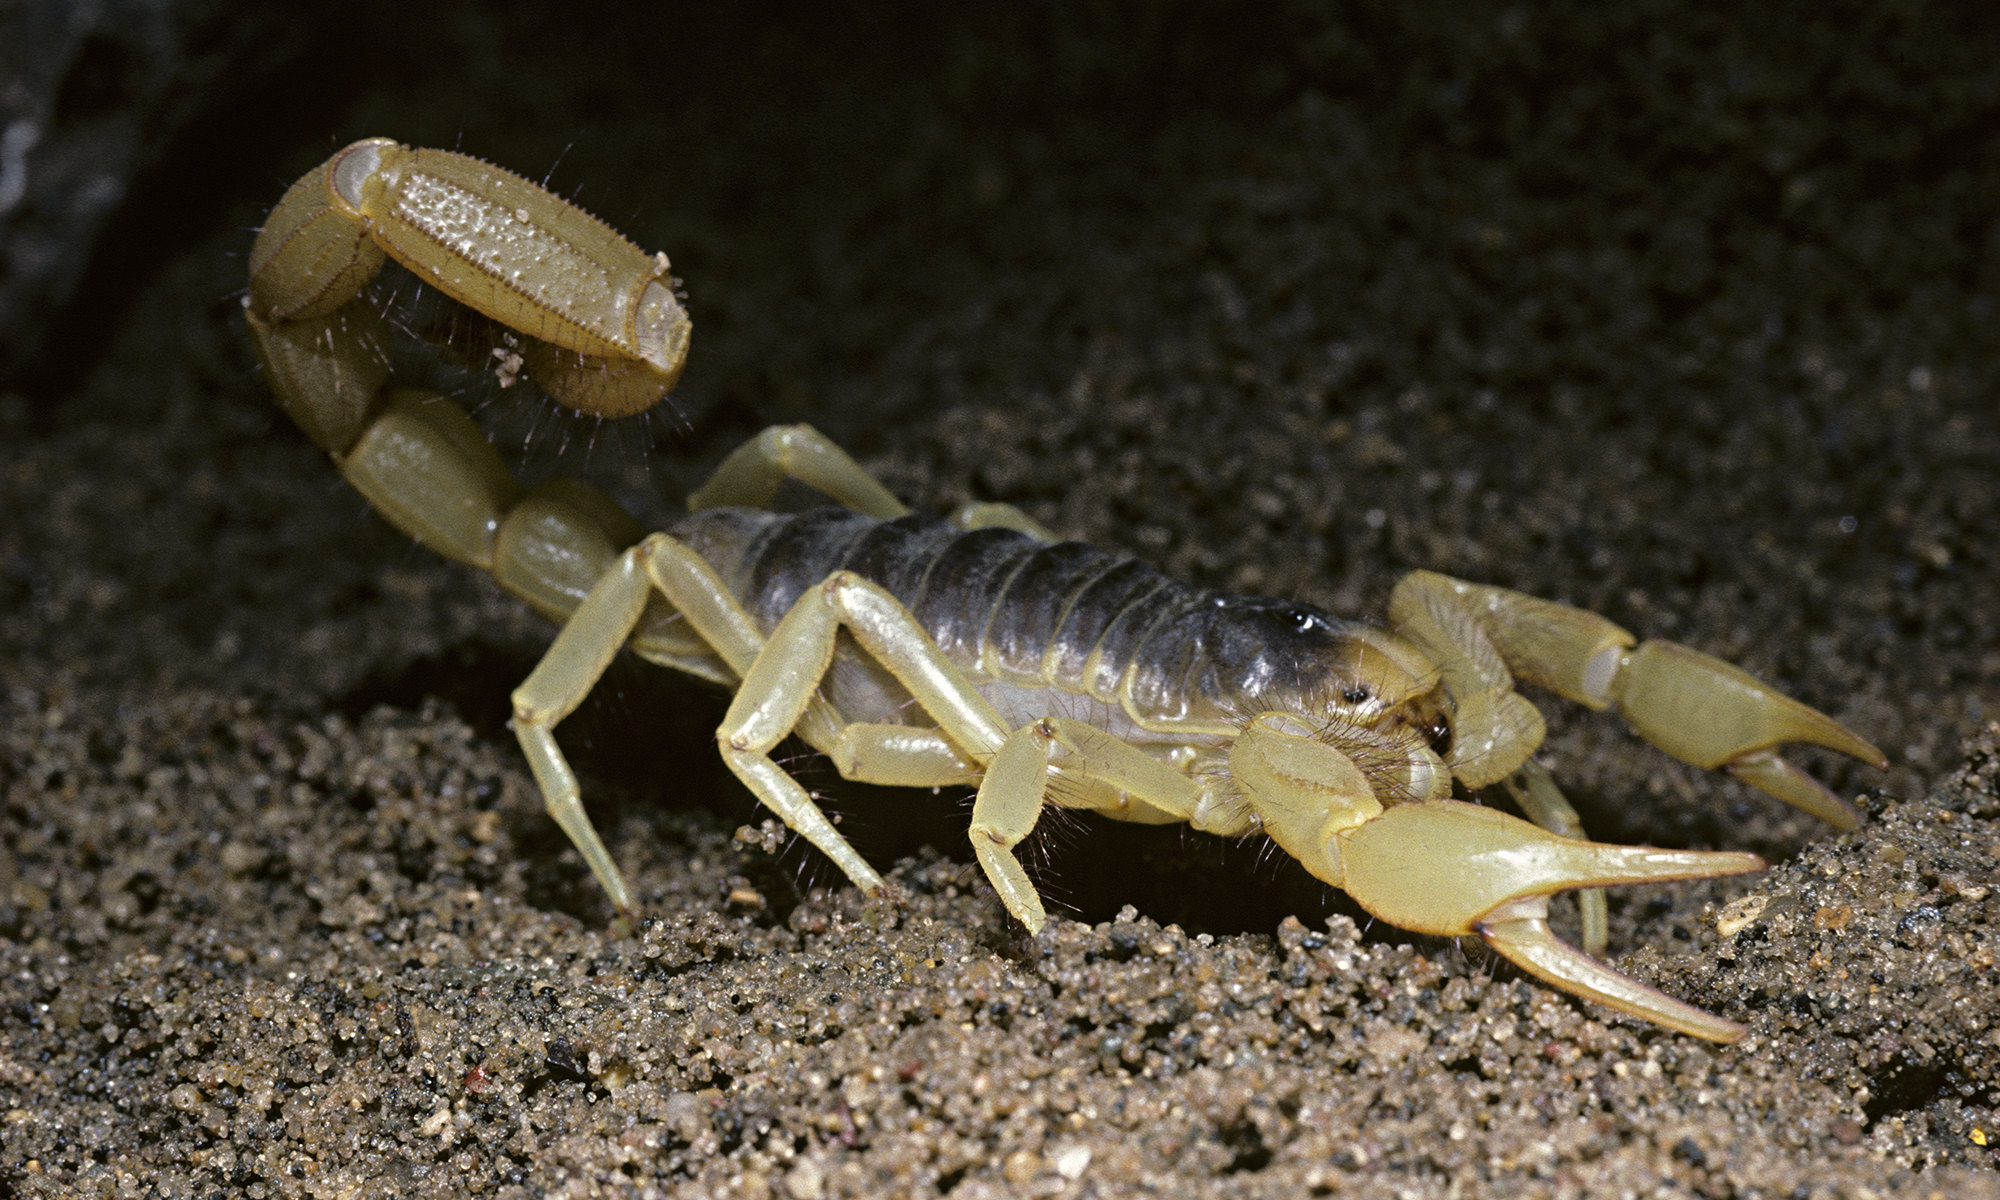 How long can scorpions live without food or water? | HowStuffWorks